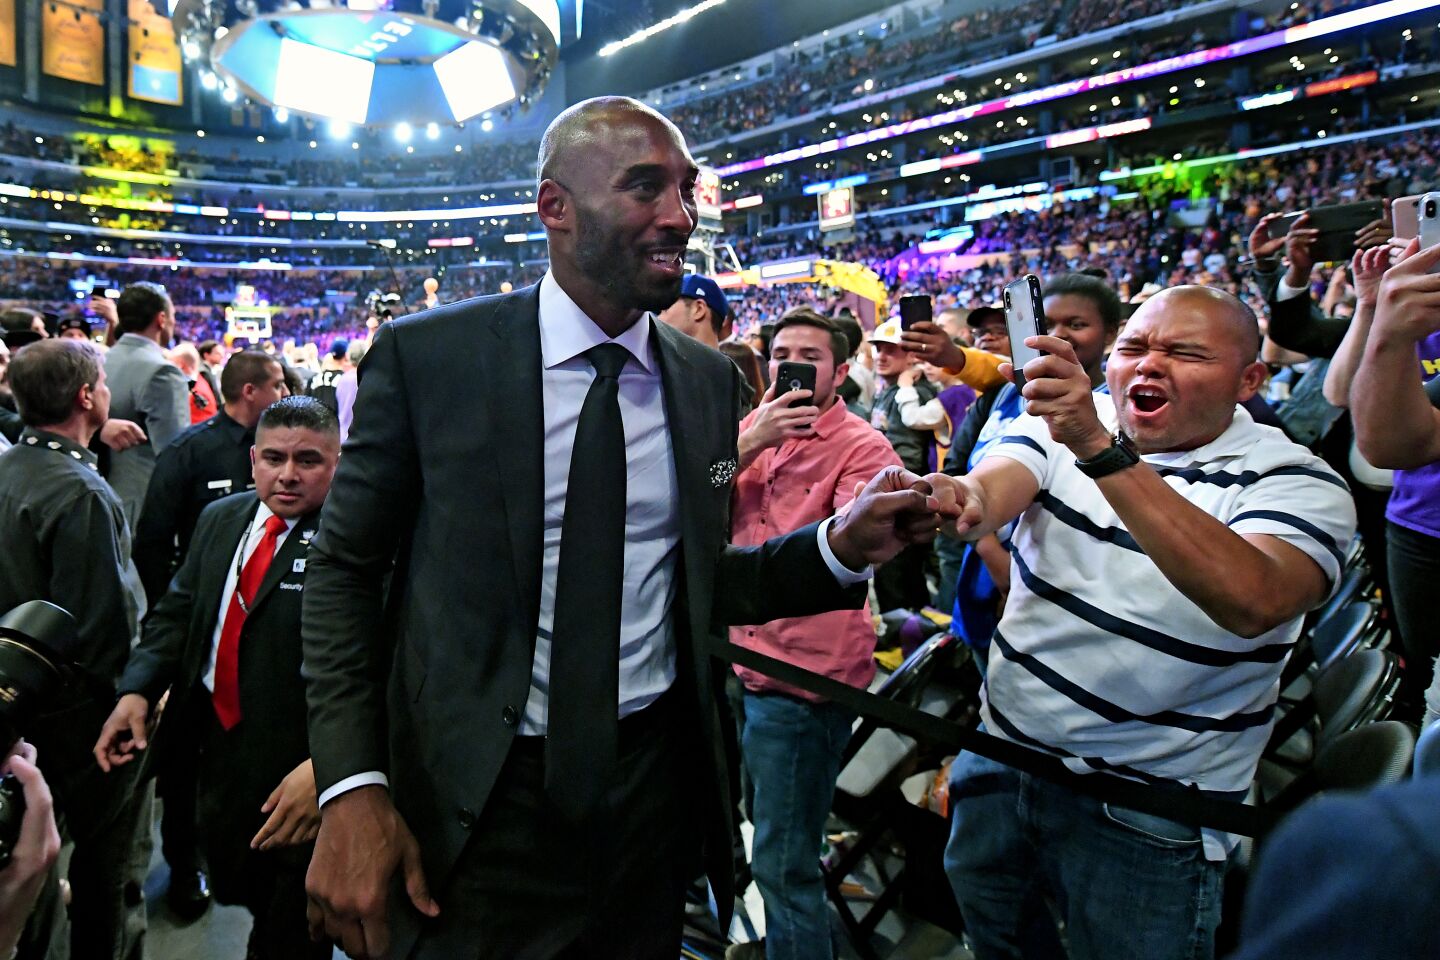 Kobe Bryant, in suit and tie, walks off the court after his jersey retirement ceremony in 2017.